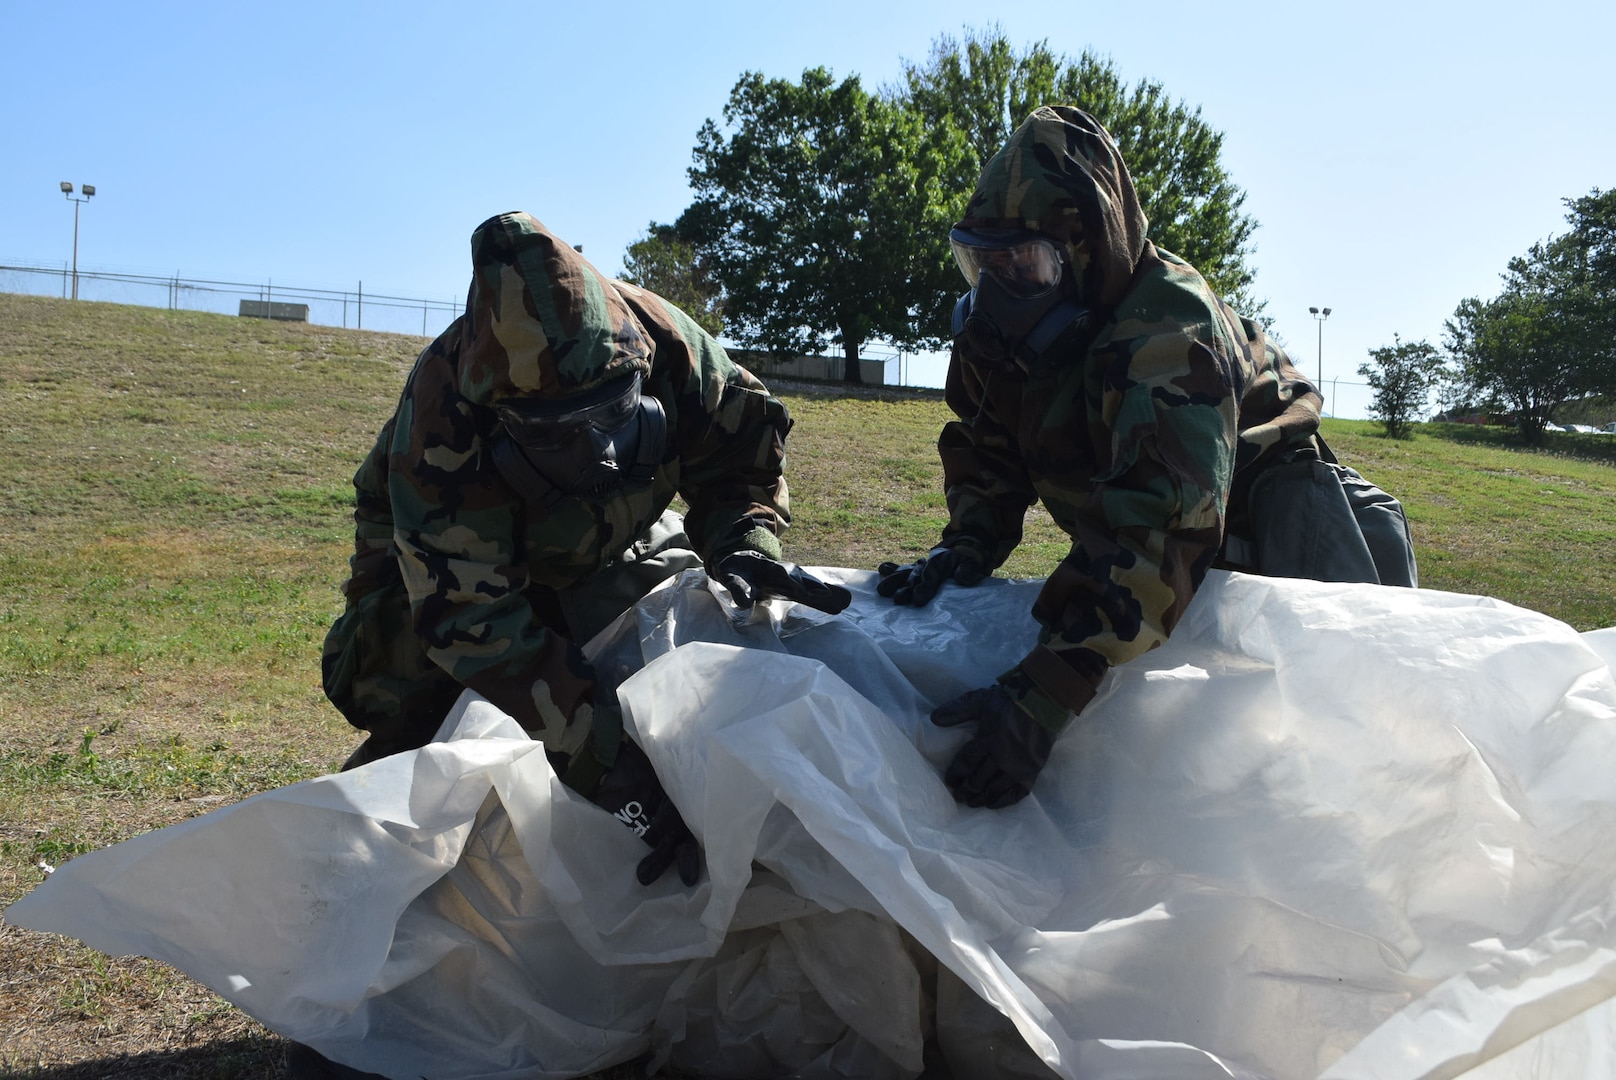 Senior Airman Jennifer Martinez and Senior Airman Ashley Garcia, 433rd Force Support Squadron, assess and cover a contaminated container for transport during a field training exercise, April 10, 2021, at Joint Base San Antonio-Lackland, Texas. Participants donned mission-oriented protective posture gear to transport simulated hazardous material. (U.S. Air Force photo by Tech. Sgt. Mike Lahrman)